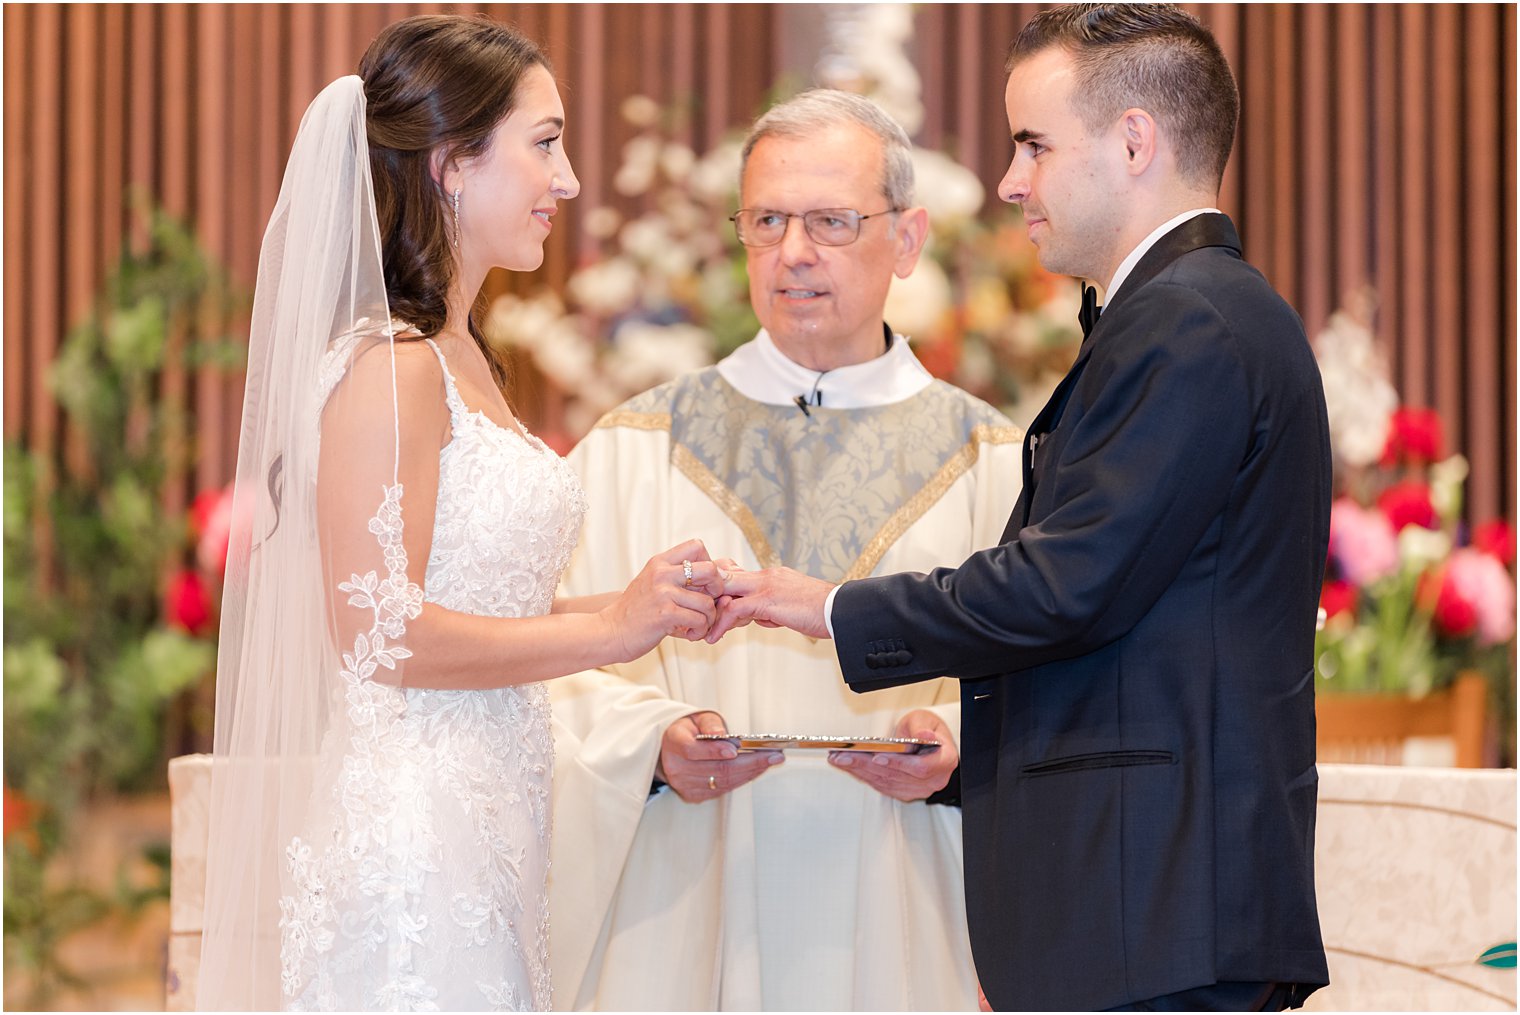 bride puts ring on groom during traditional church wedding ceremony in New Jersey